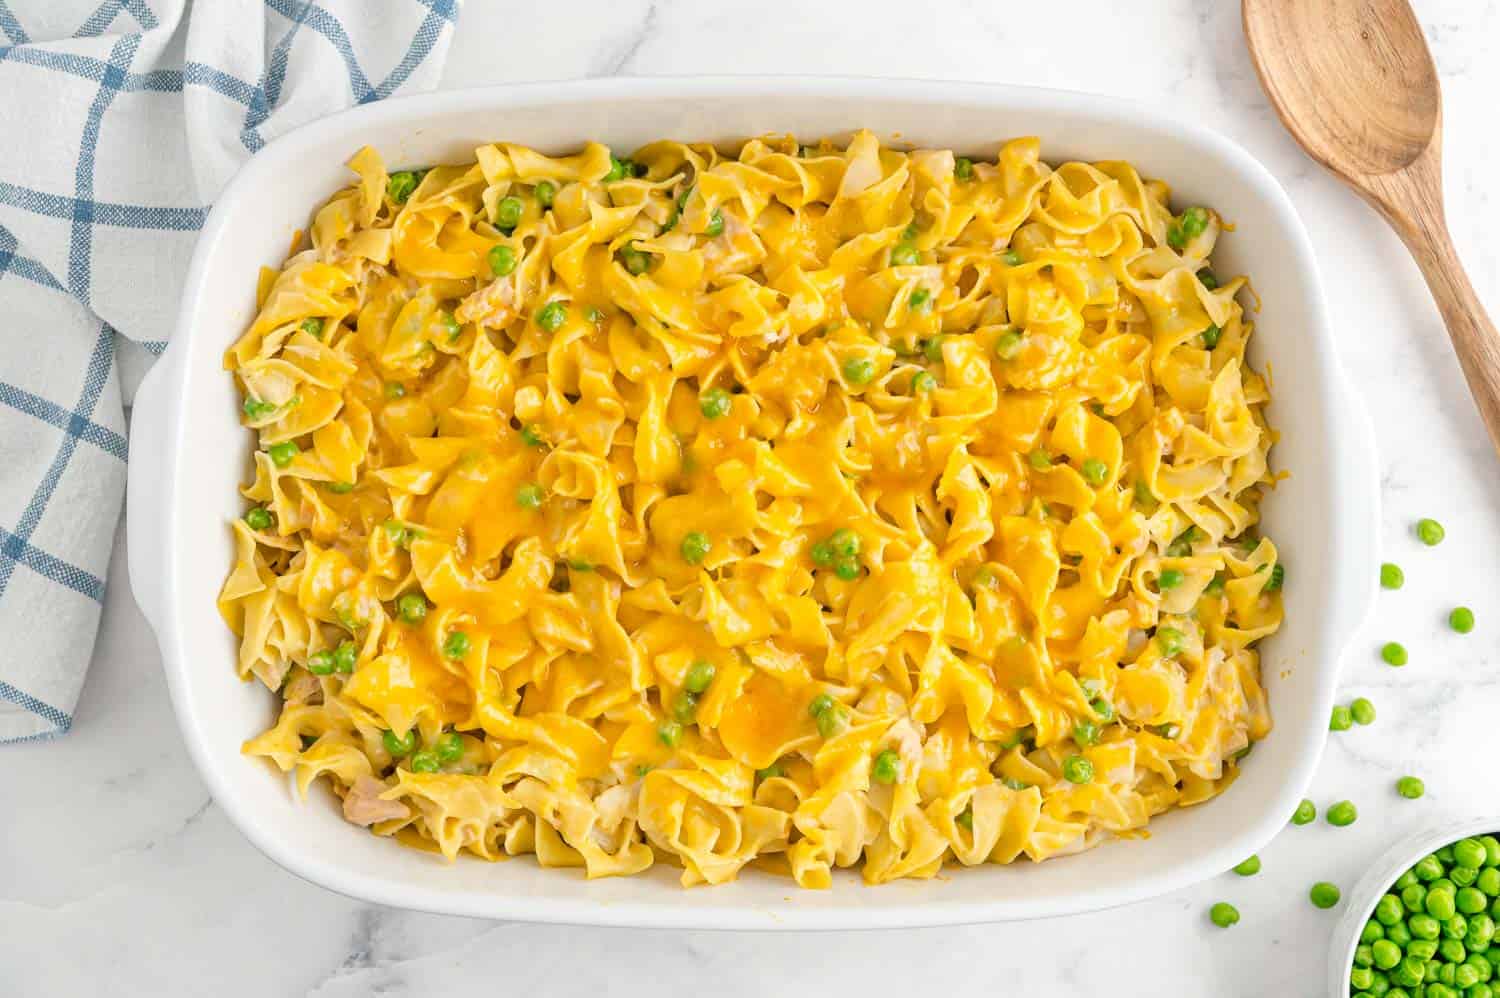 Baked casserole with tuna and peas in a white baking dish.